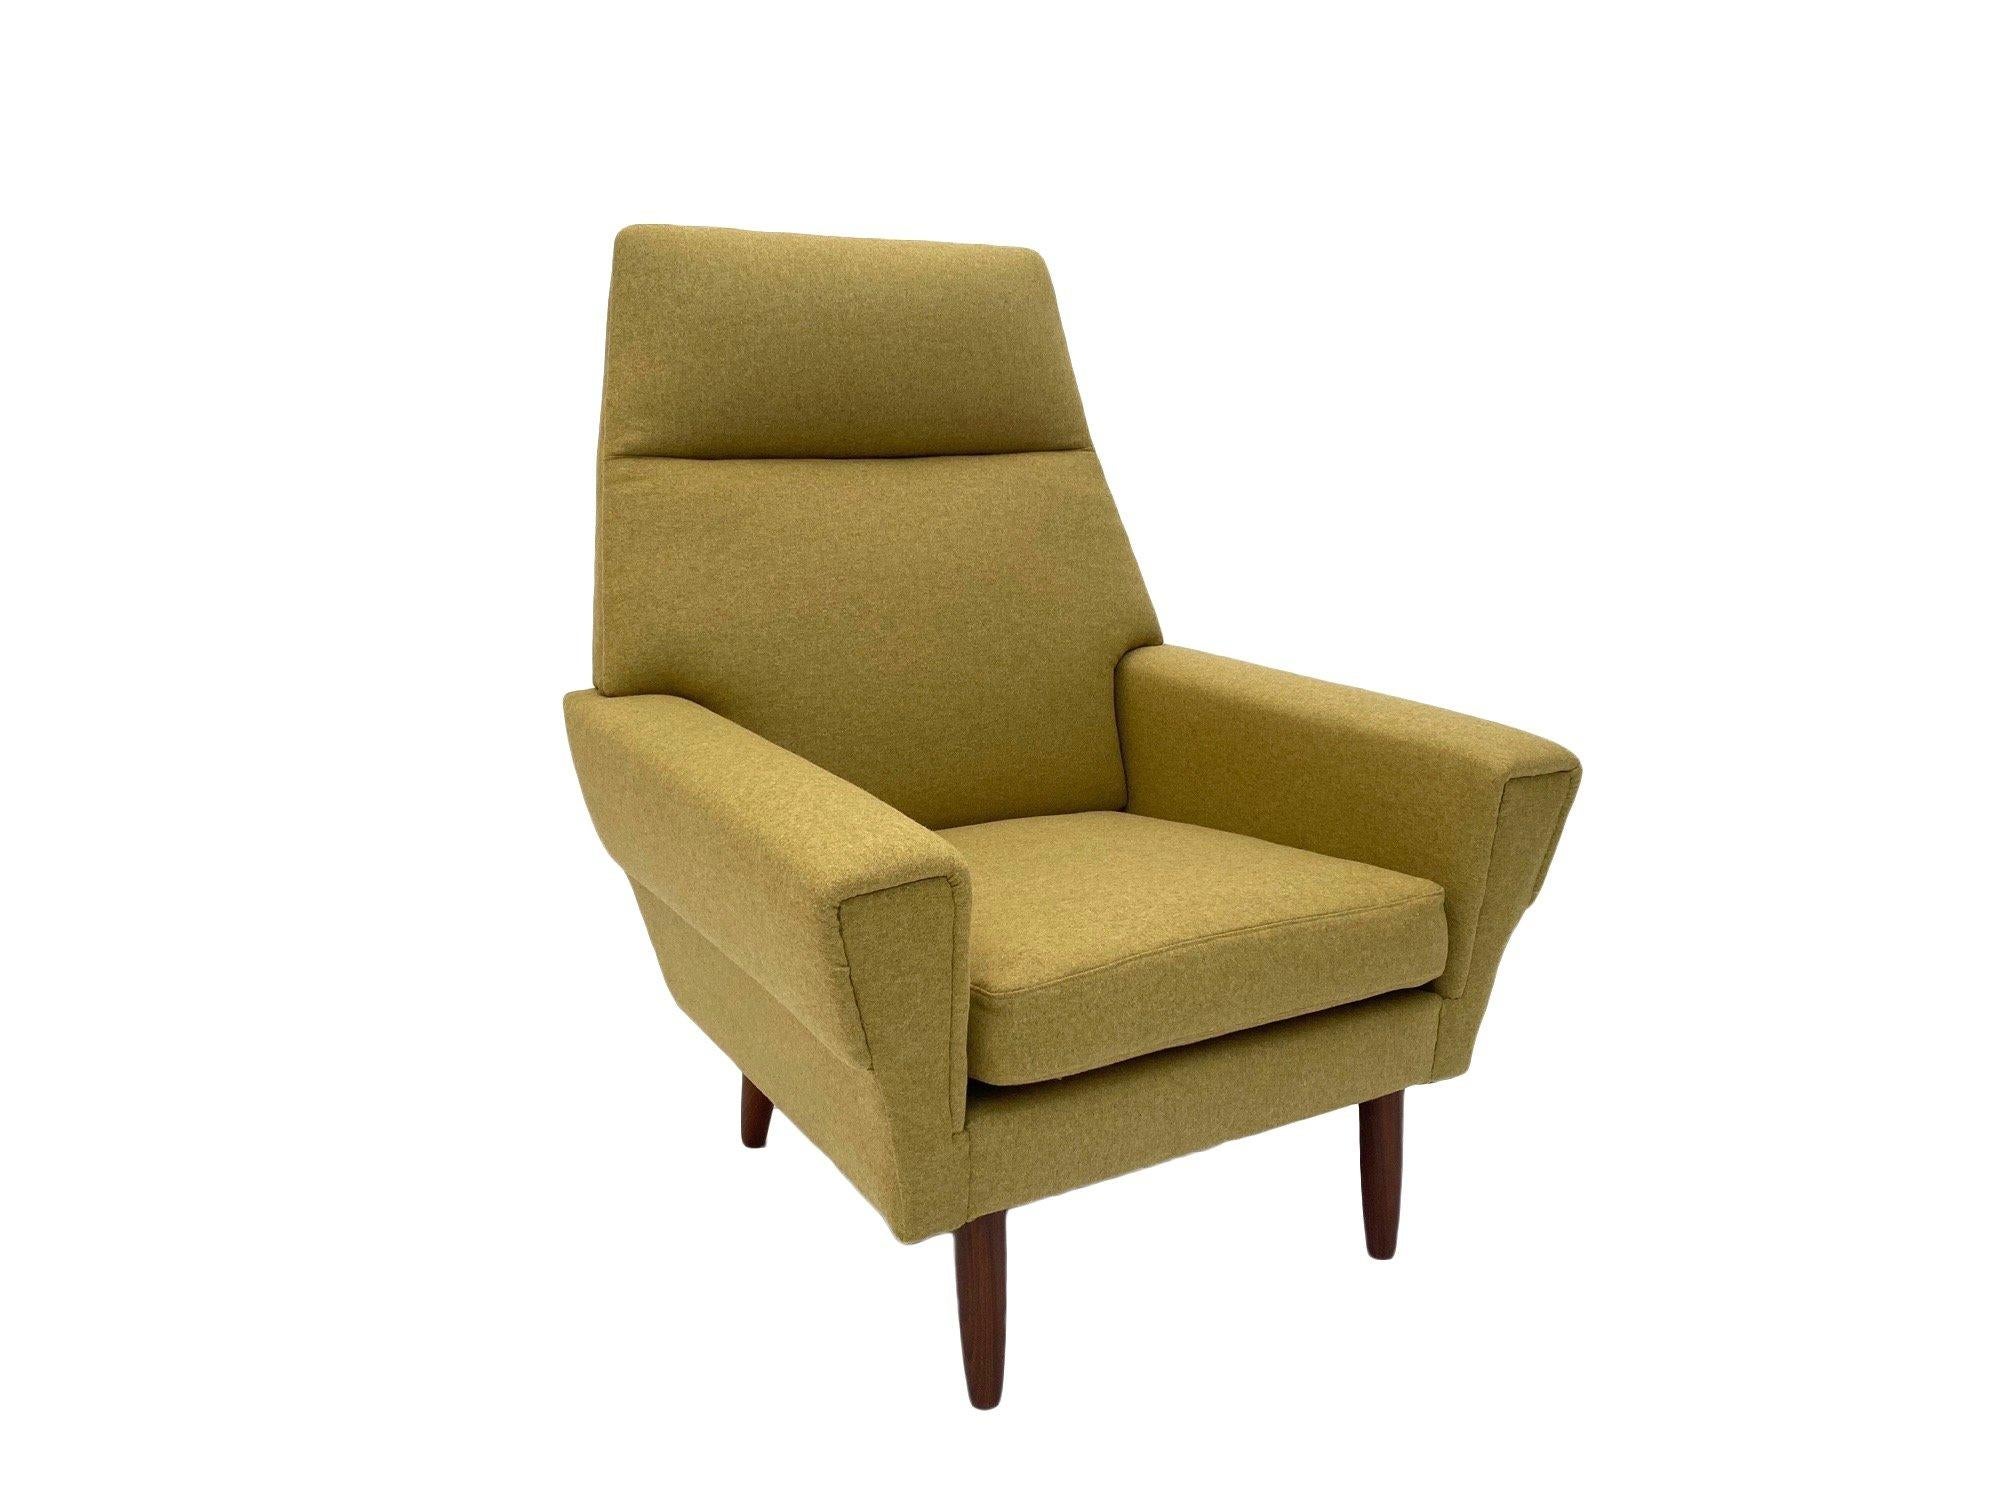 A beautiful Danish buttermilk wool and teak highback armchair, this would make a stylish addition to any living or work area.

The chair has a wide seat and padded backrest for enhanced comfort. A striking piece of classic Scandinavian